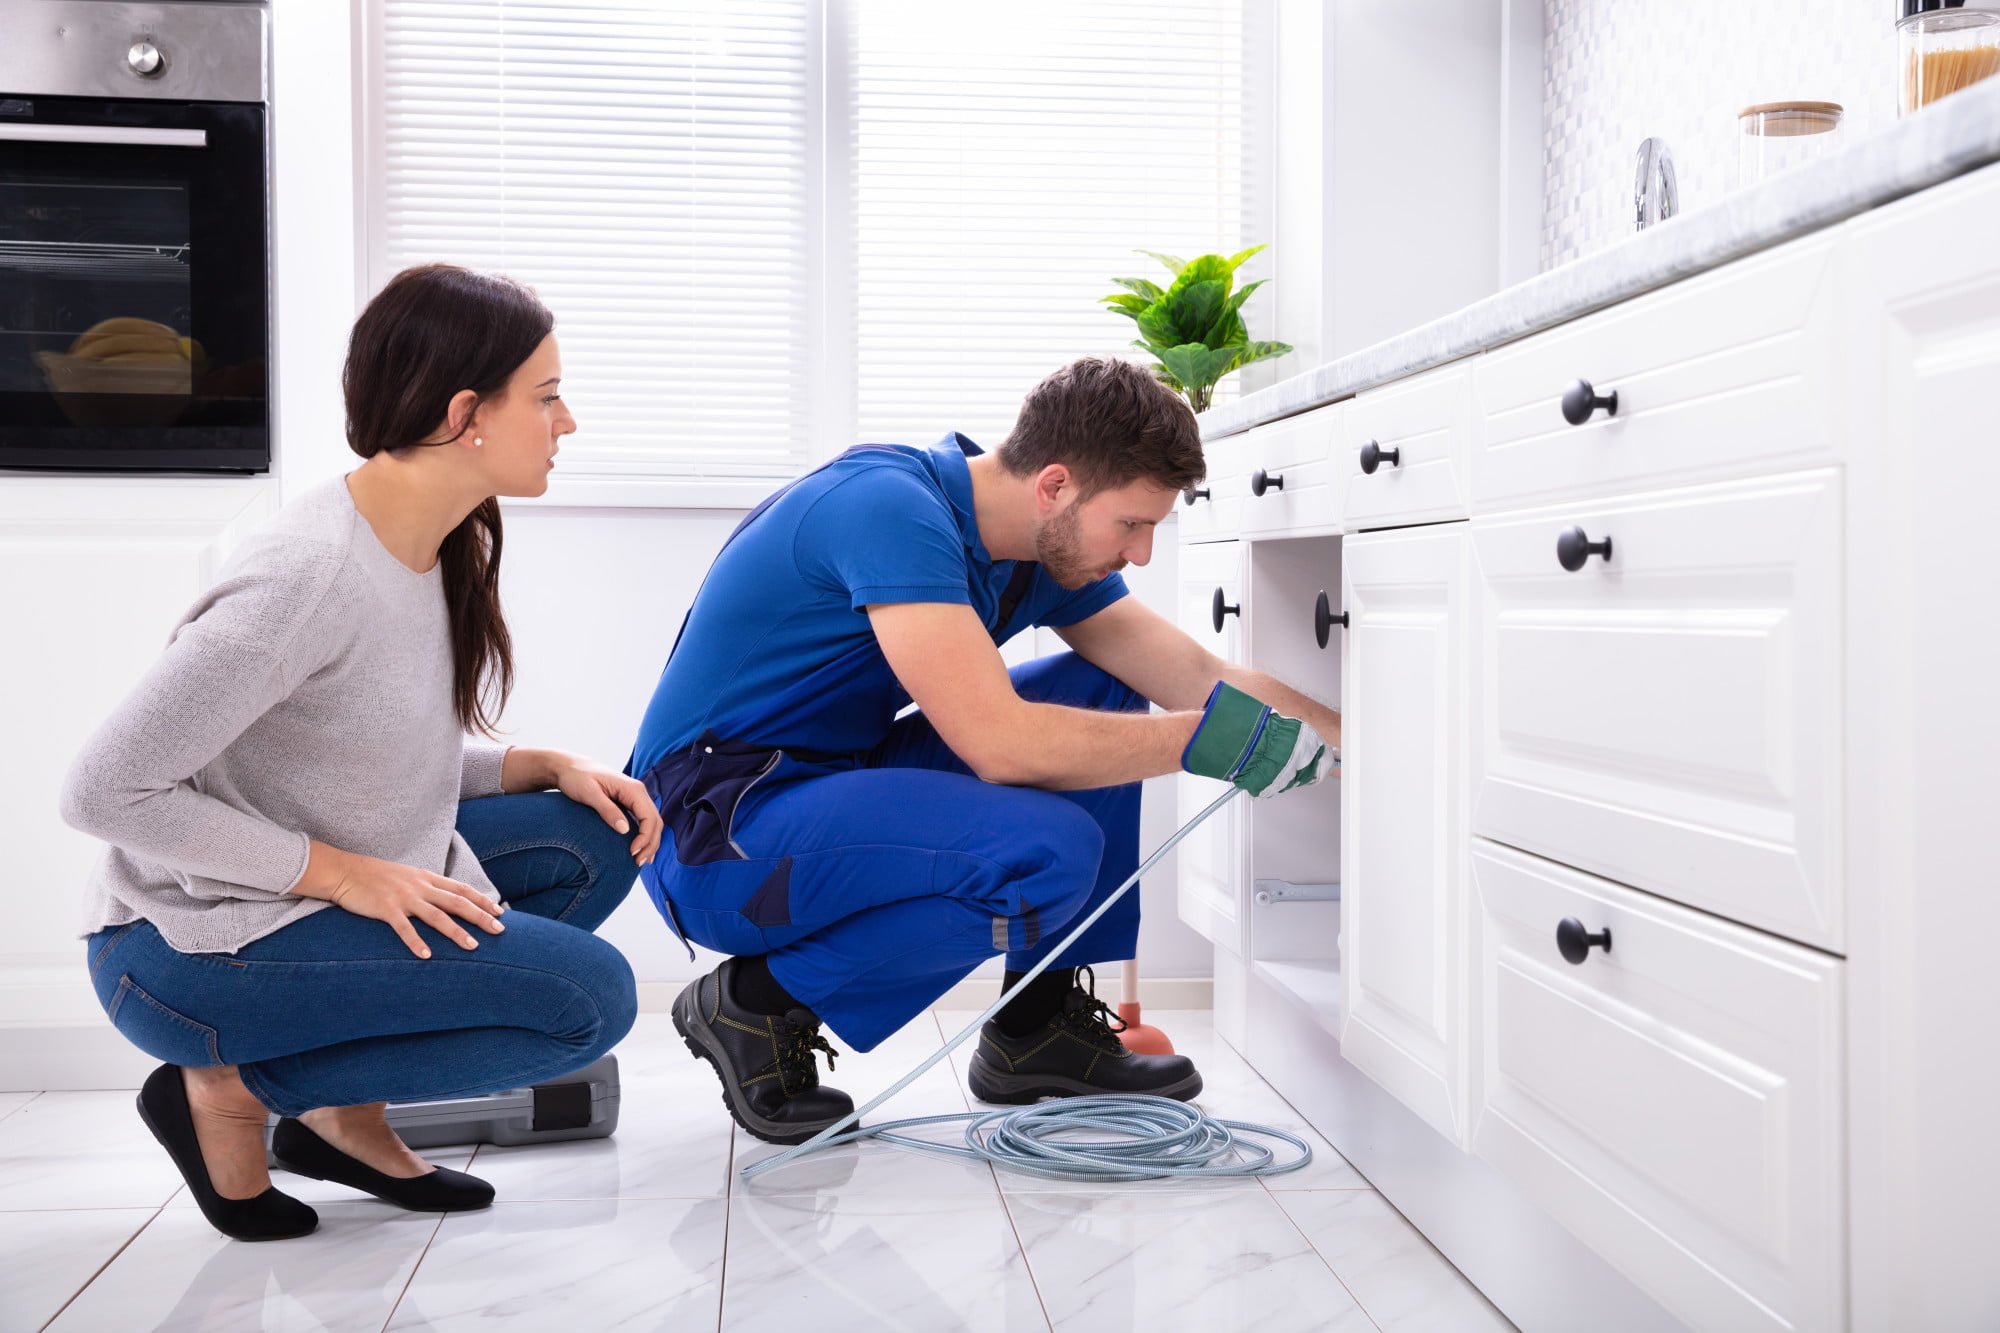 How do you choose the best drain cleaning service, and when do you need them? Read this guide to learn what they help with and how to pick one.